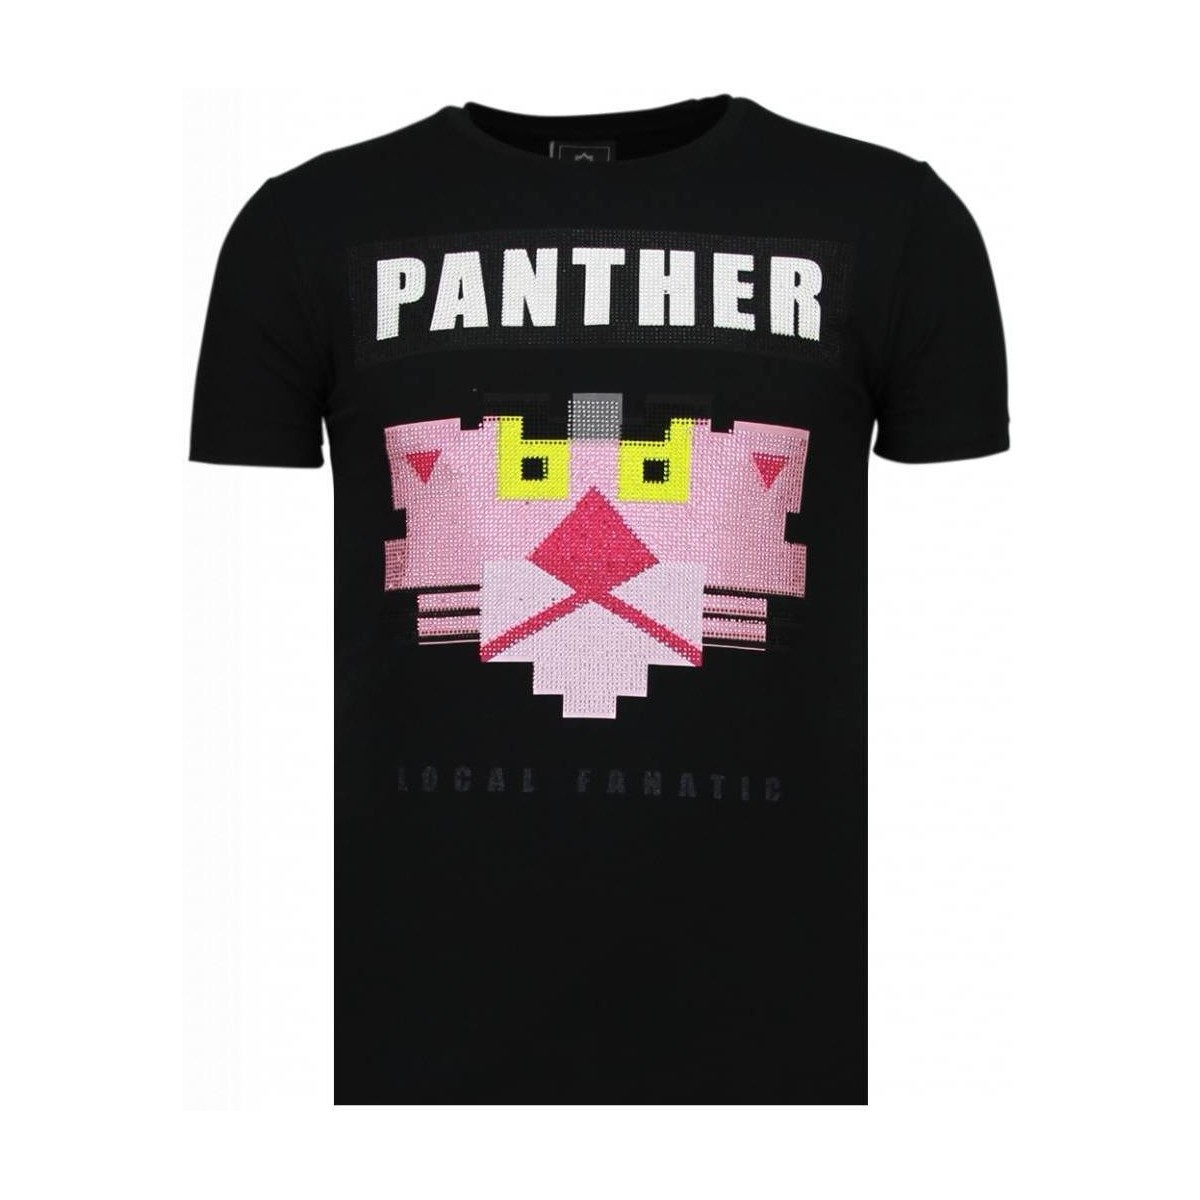 textil Herr T-shirts Local Fanatic Pink Panther For A Cougar Svart